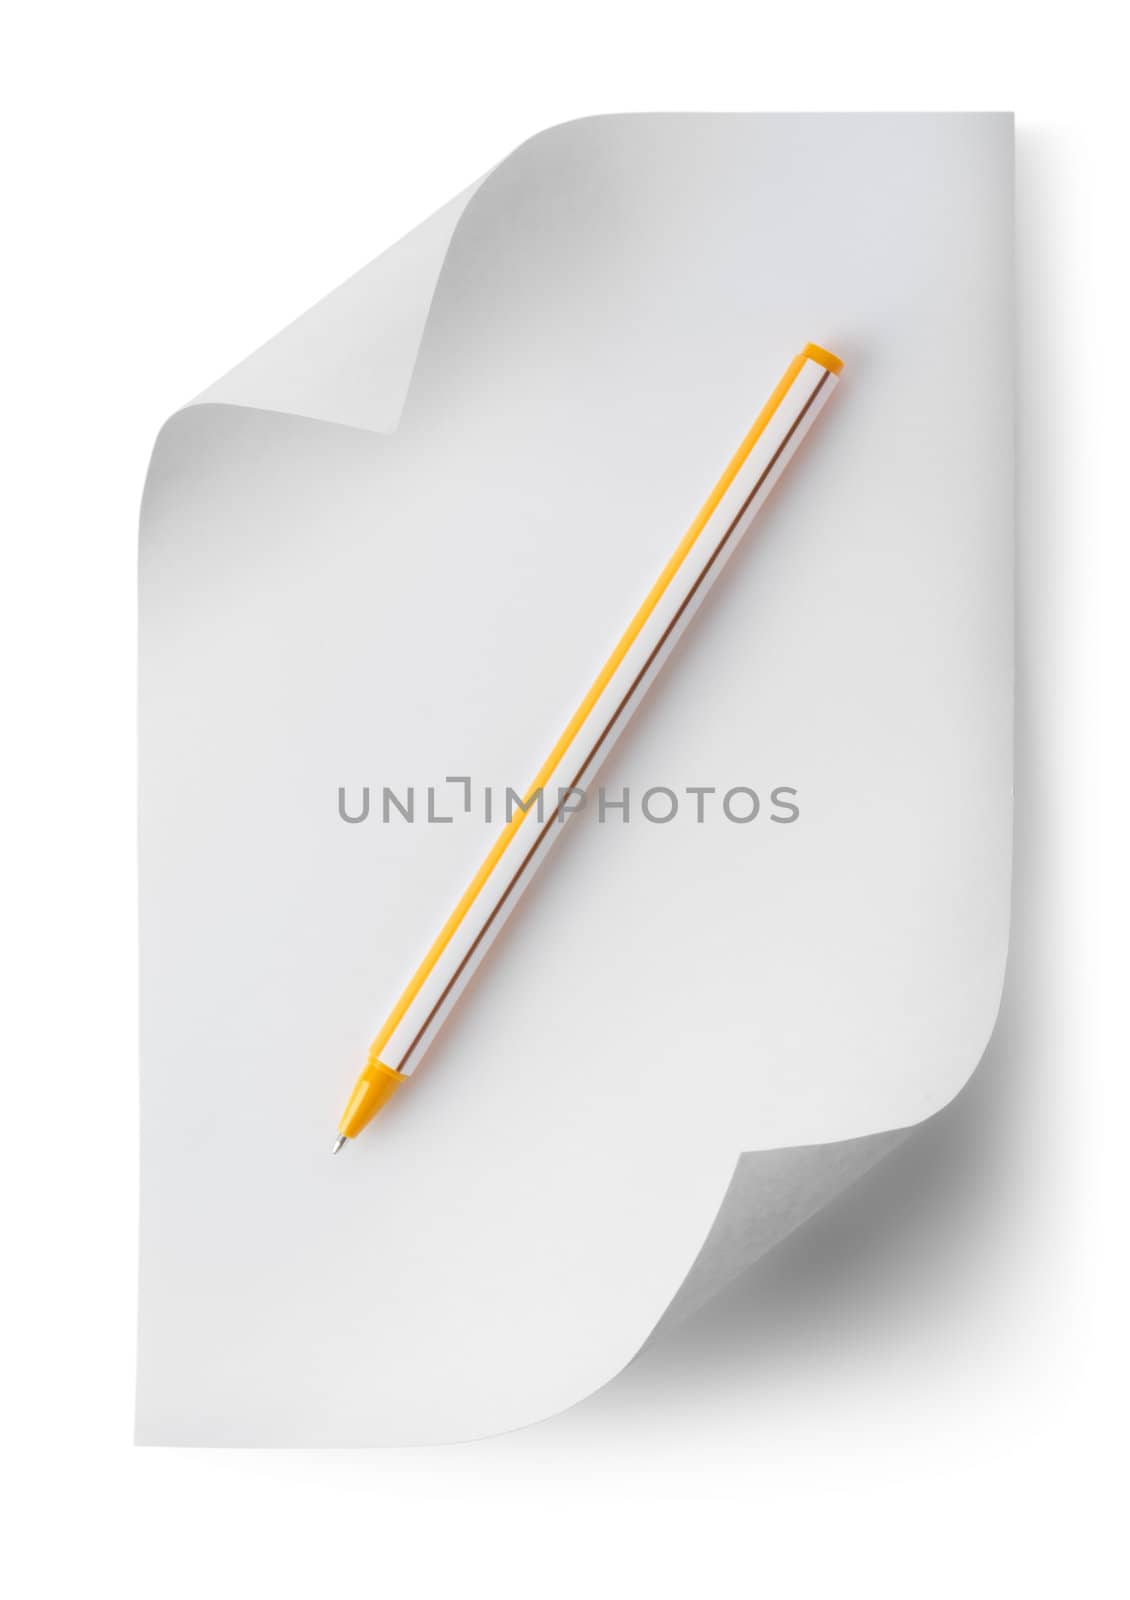 Pen with a sheet of paper isolated on white background. Clipping path